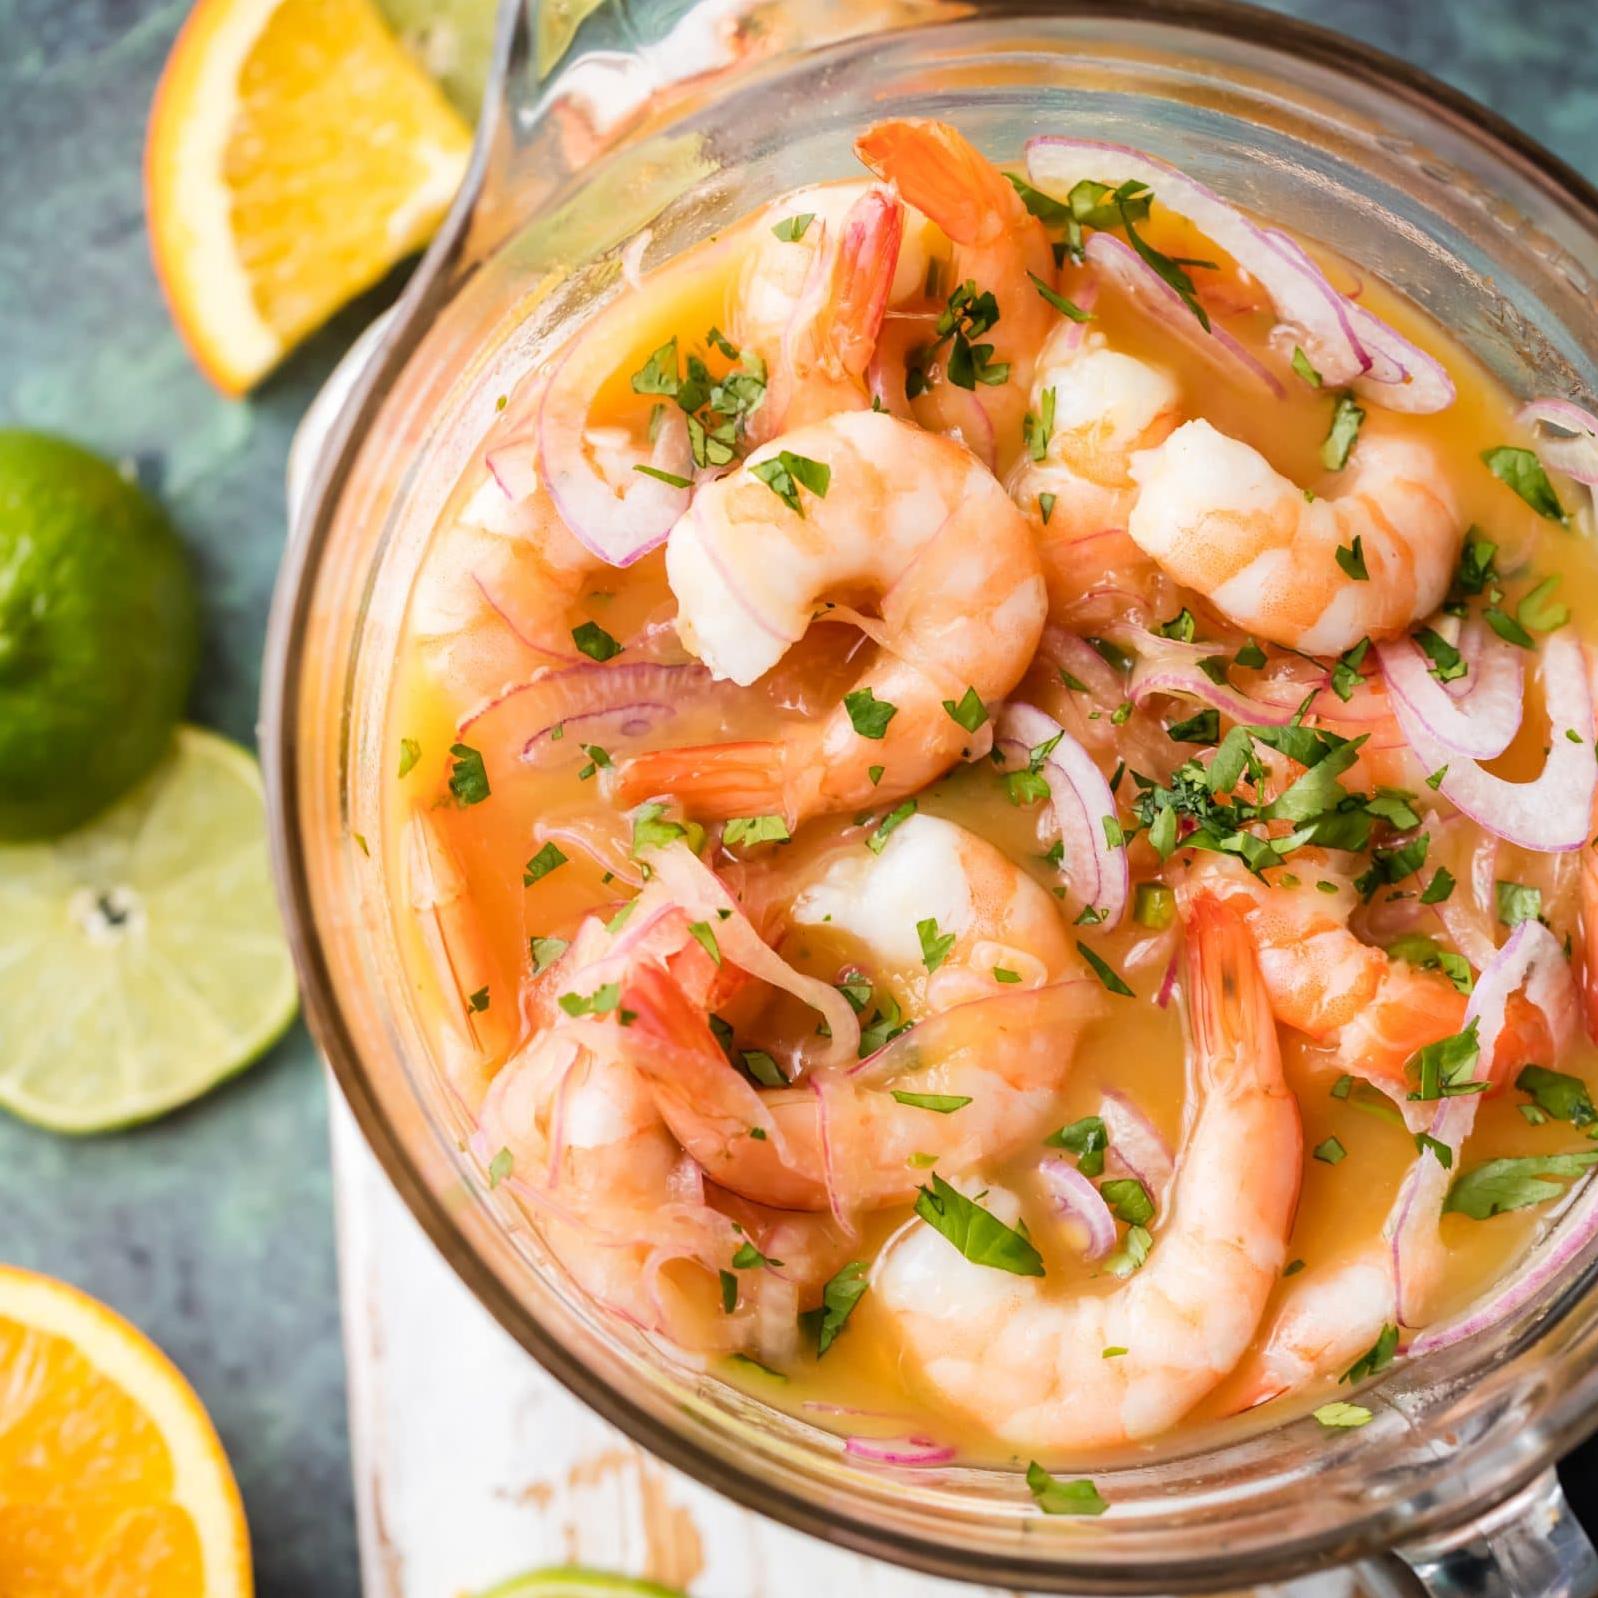 Try Our Mouth-Watering Ceviche De Camarones Recipe Today!